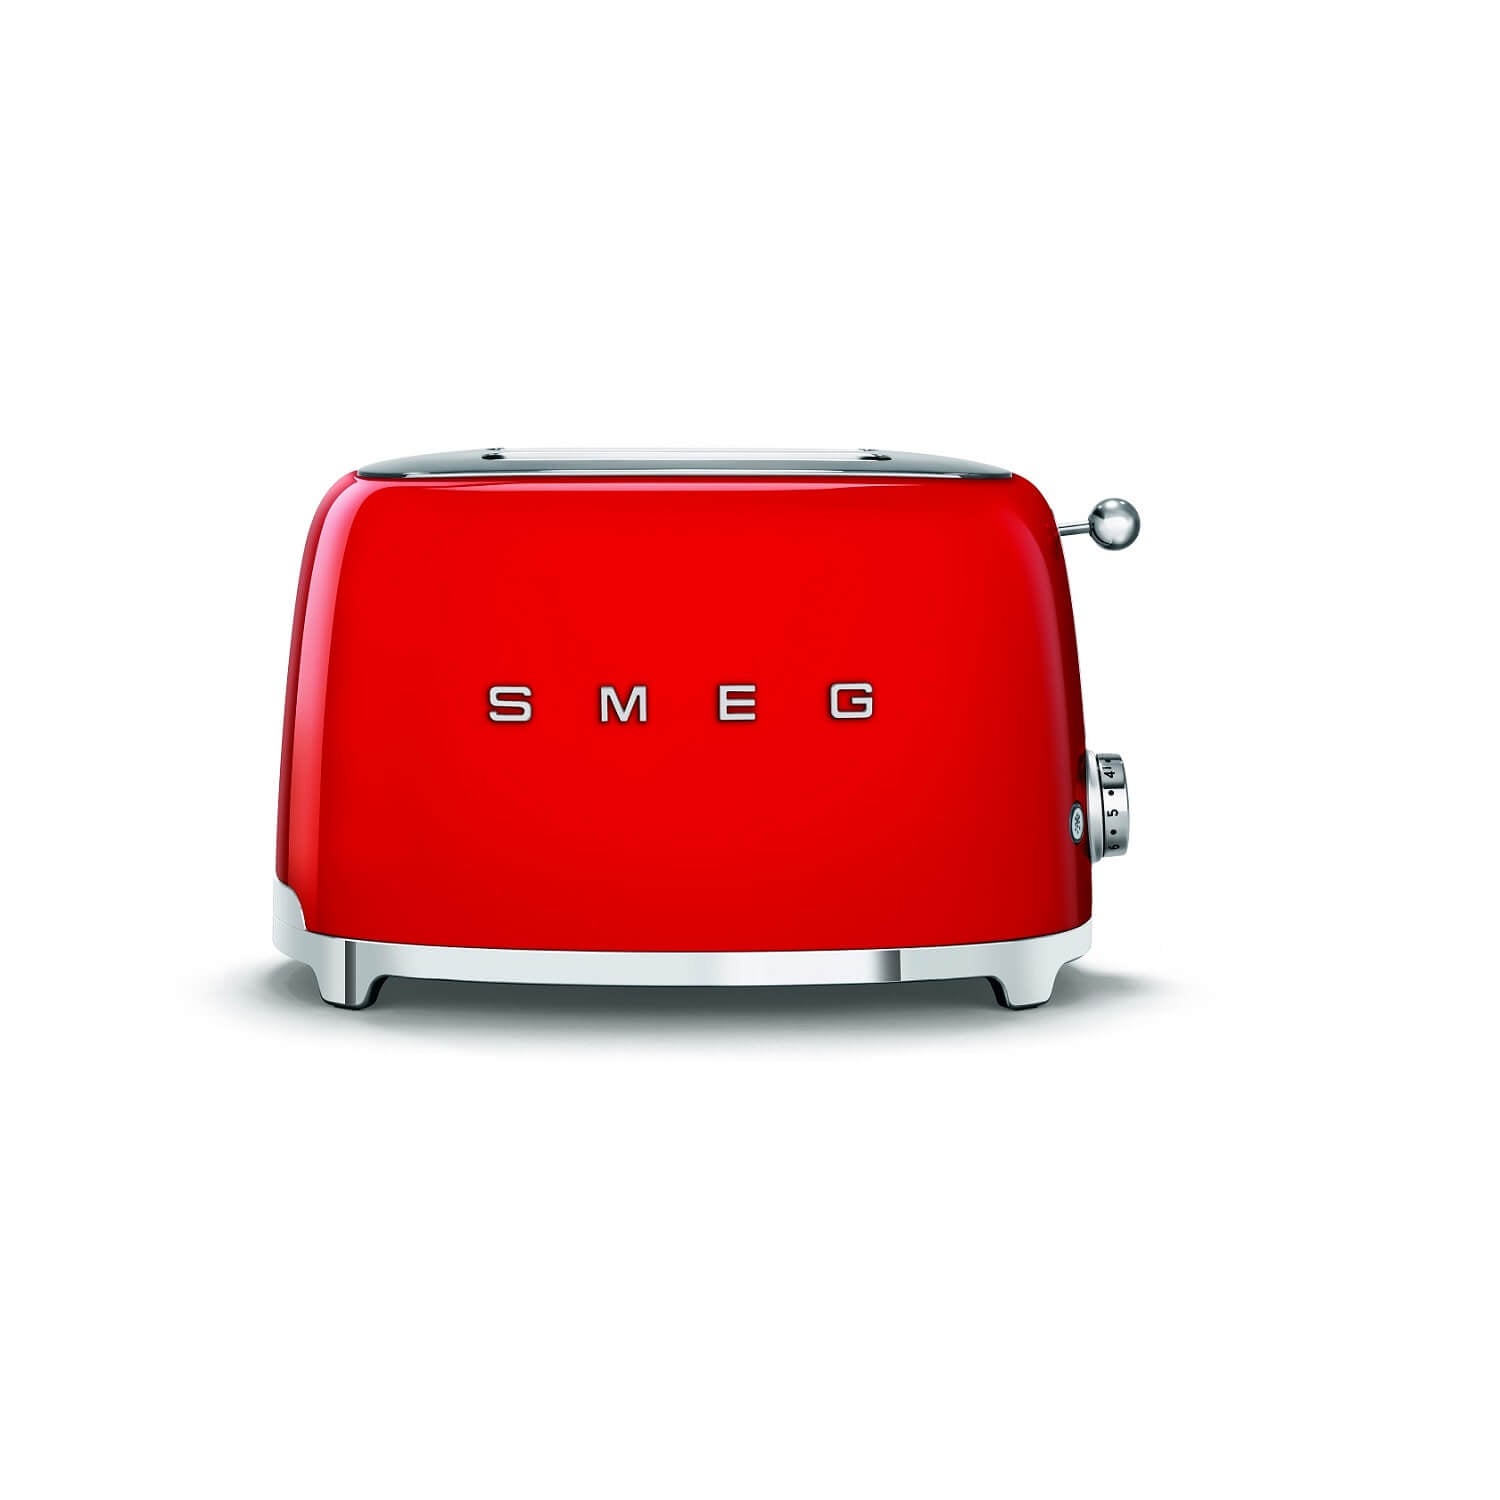 SMEG 50's Style 2 Slice Toaster - Red Color